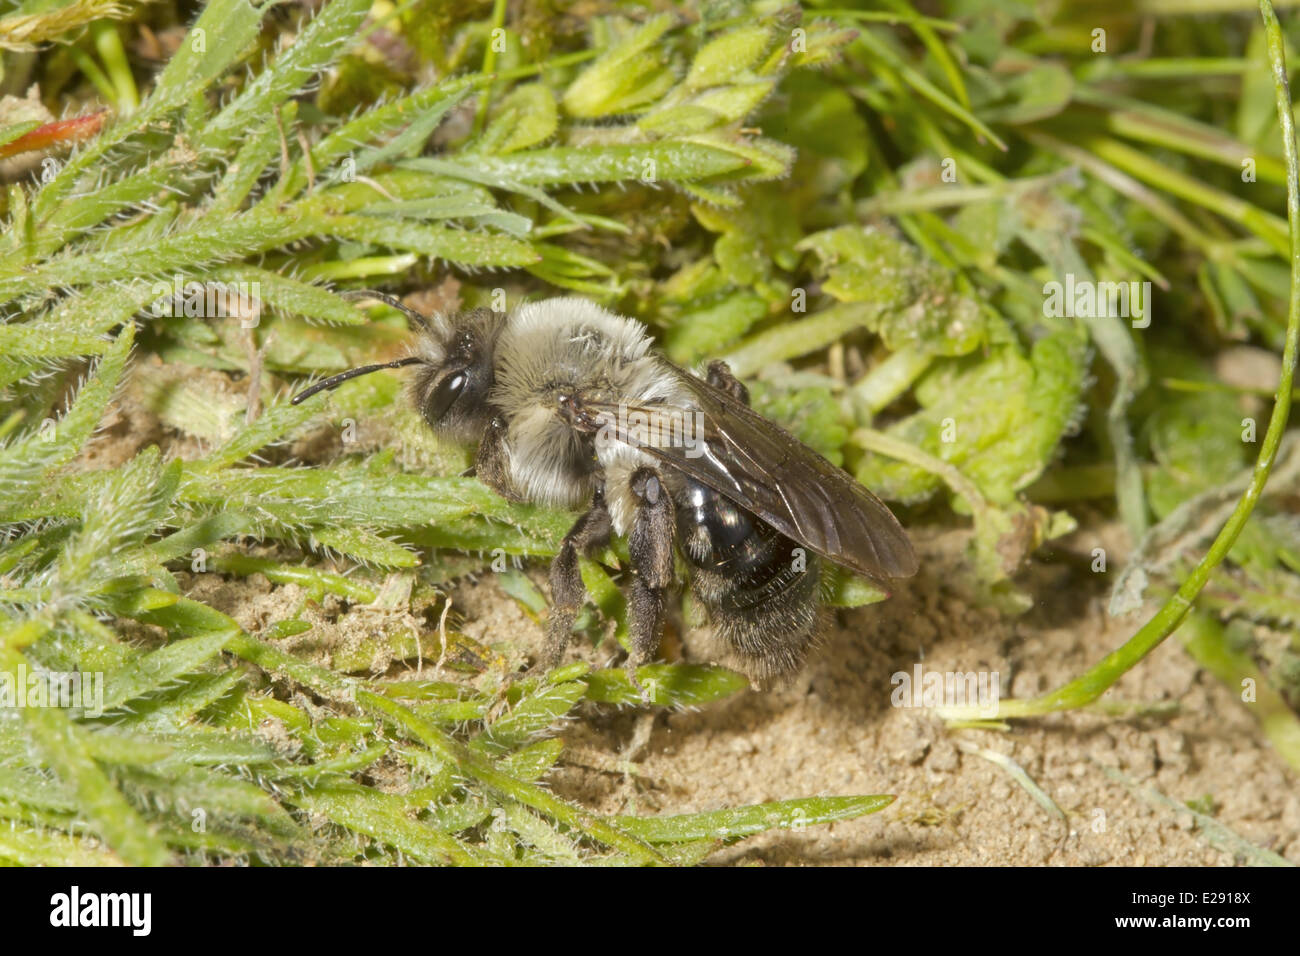 Grey Mining Bee (Andrena vaga) adult, locally extinct in UK since 1946 and first seen again this year at two sites, Dungeness RSPB Reserve, Kent, England, April 2014 Stock Photo